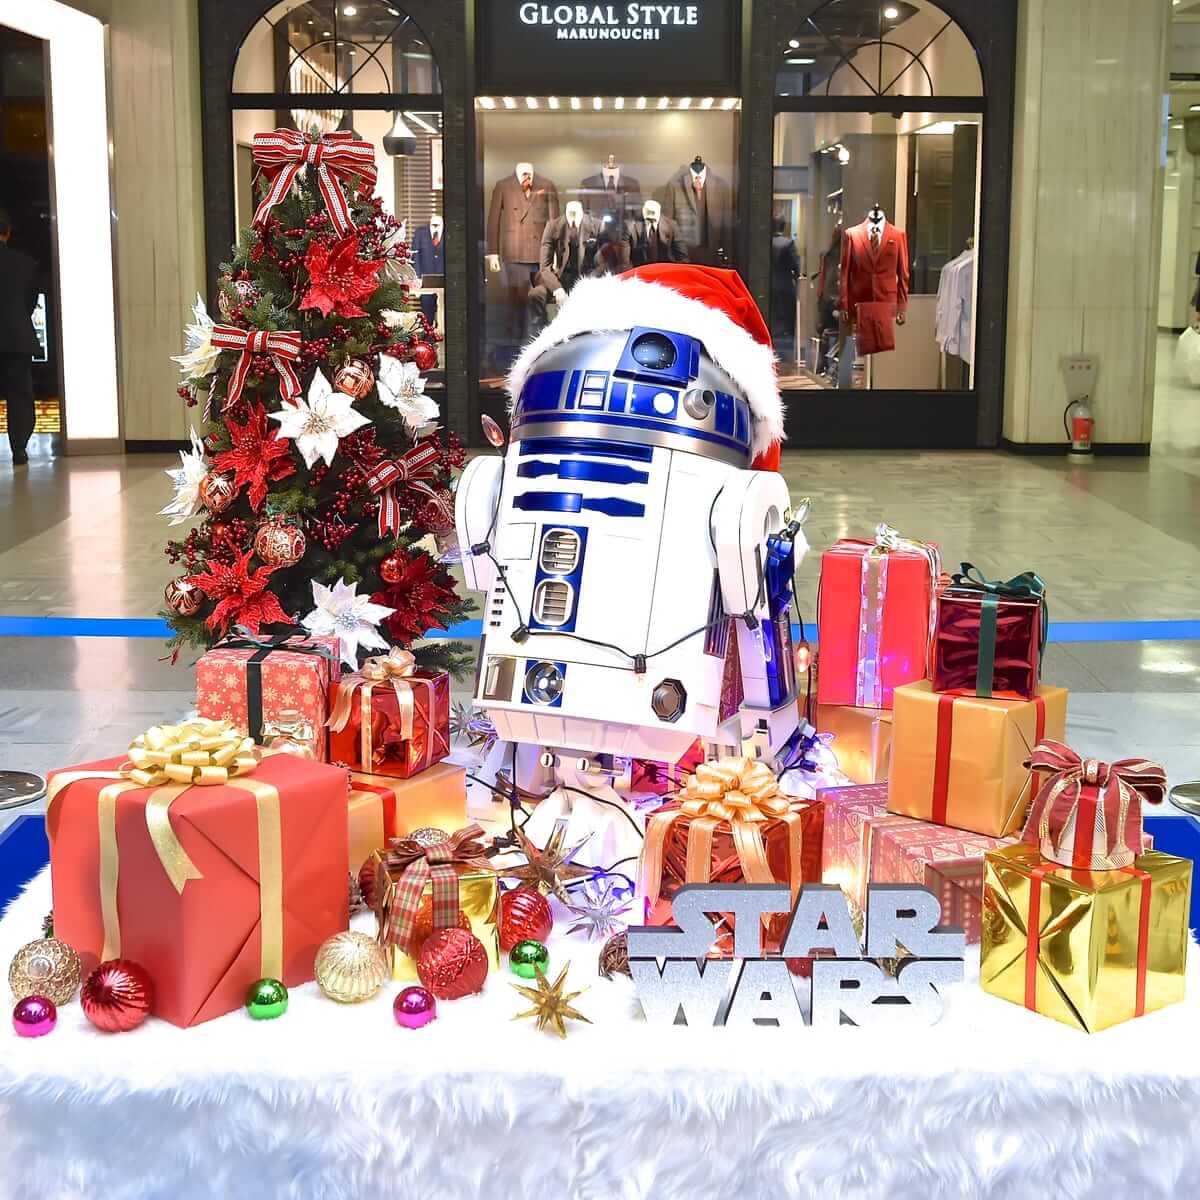 MEMORIAL GIFTS ～R2-D2 から、特別なクリスマスプレゼント～